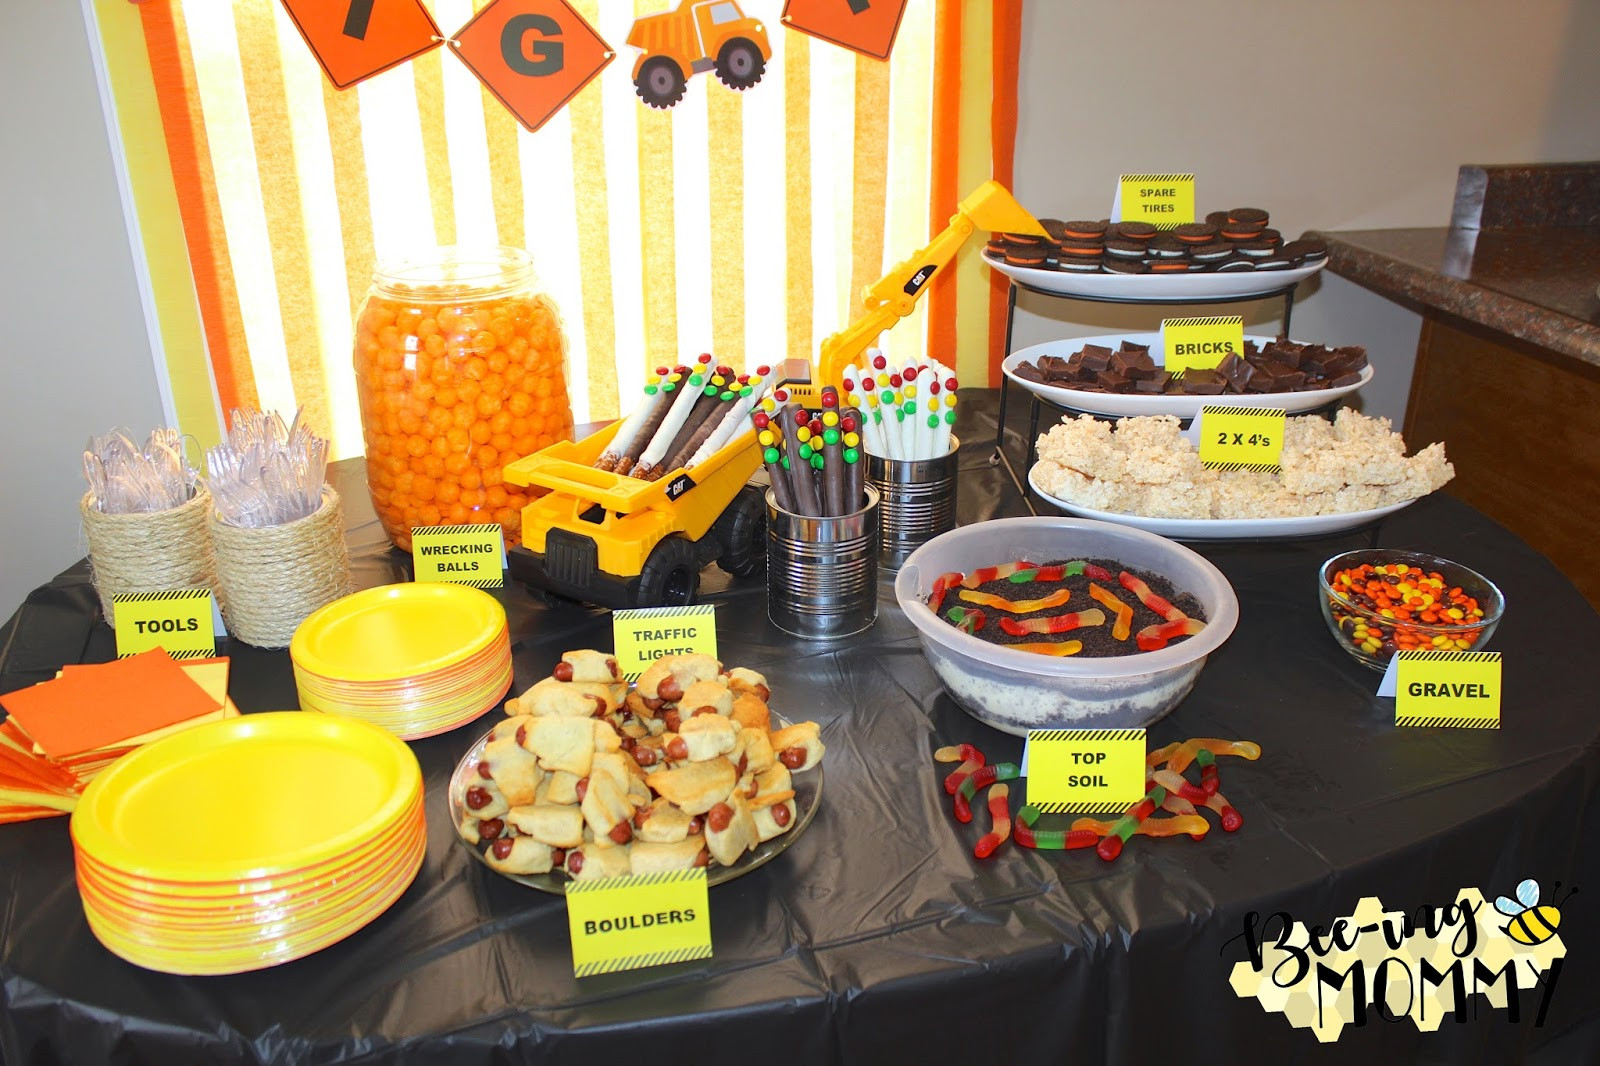 Construction Party Food Ideas
 Bee ing Mommy Blog Construction Birthday Party